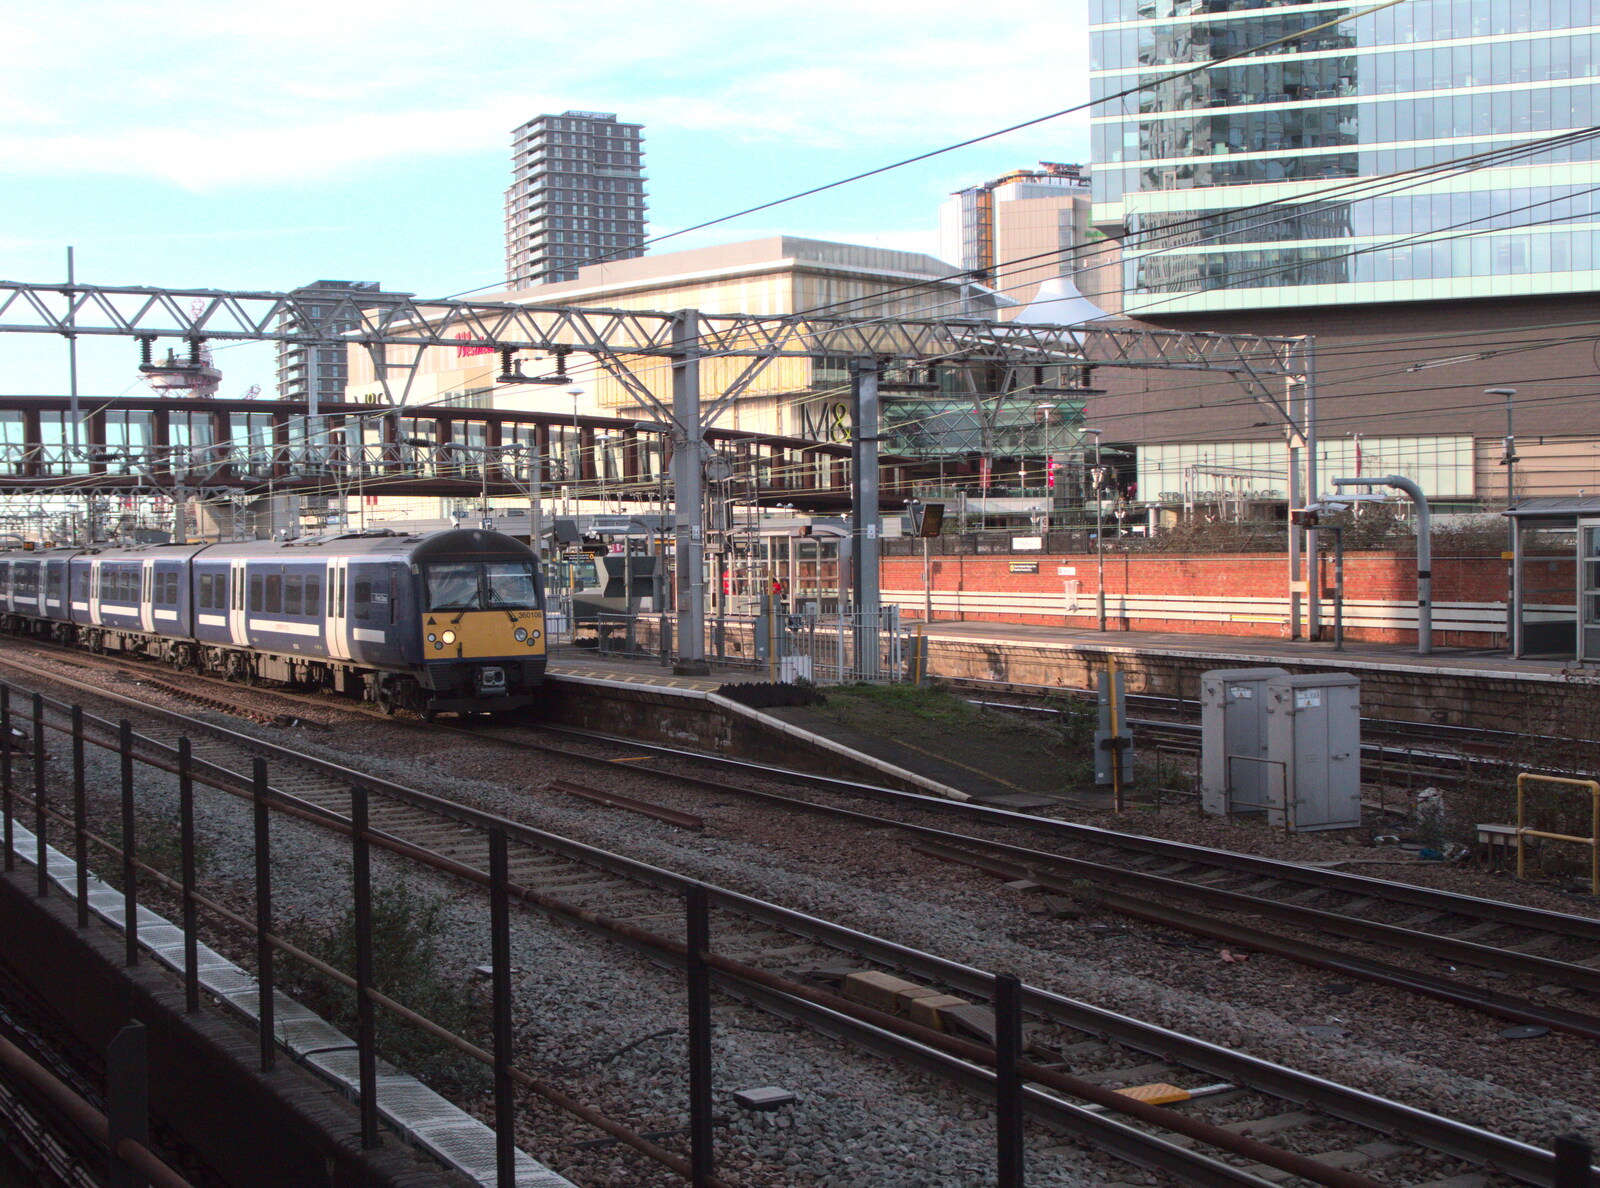 Broken-down Freight Trains, Manor Park, London - 28th January 2020: Stratford Station and a Class 360 commuter